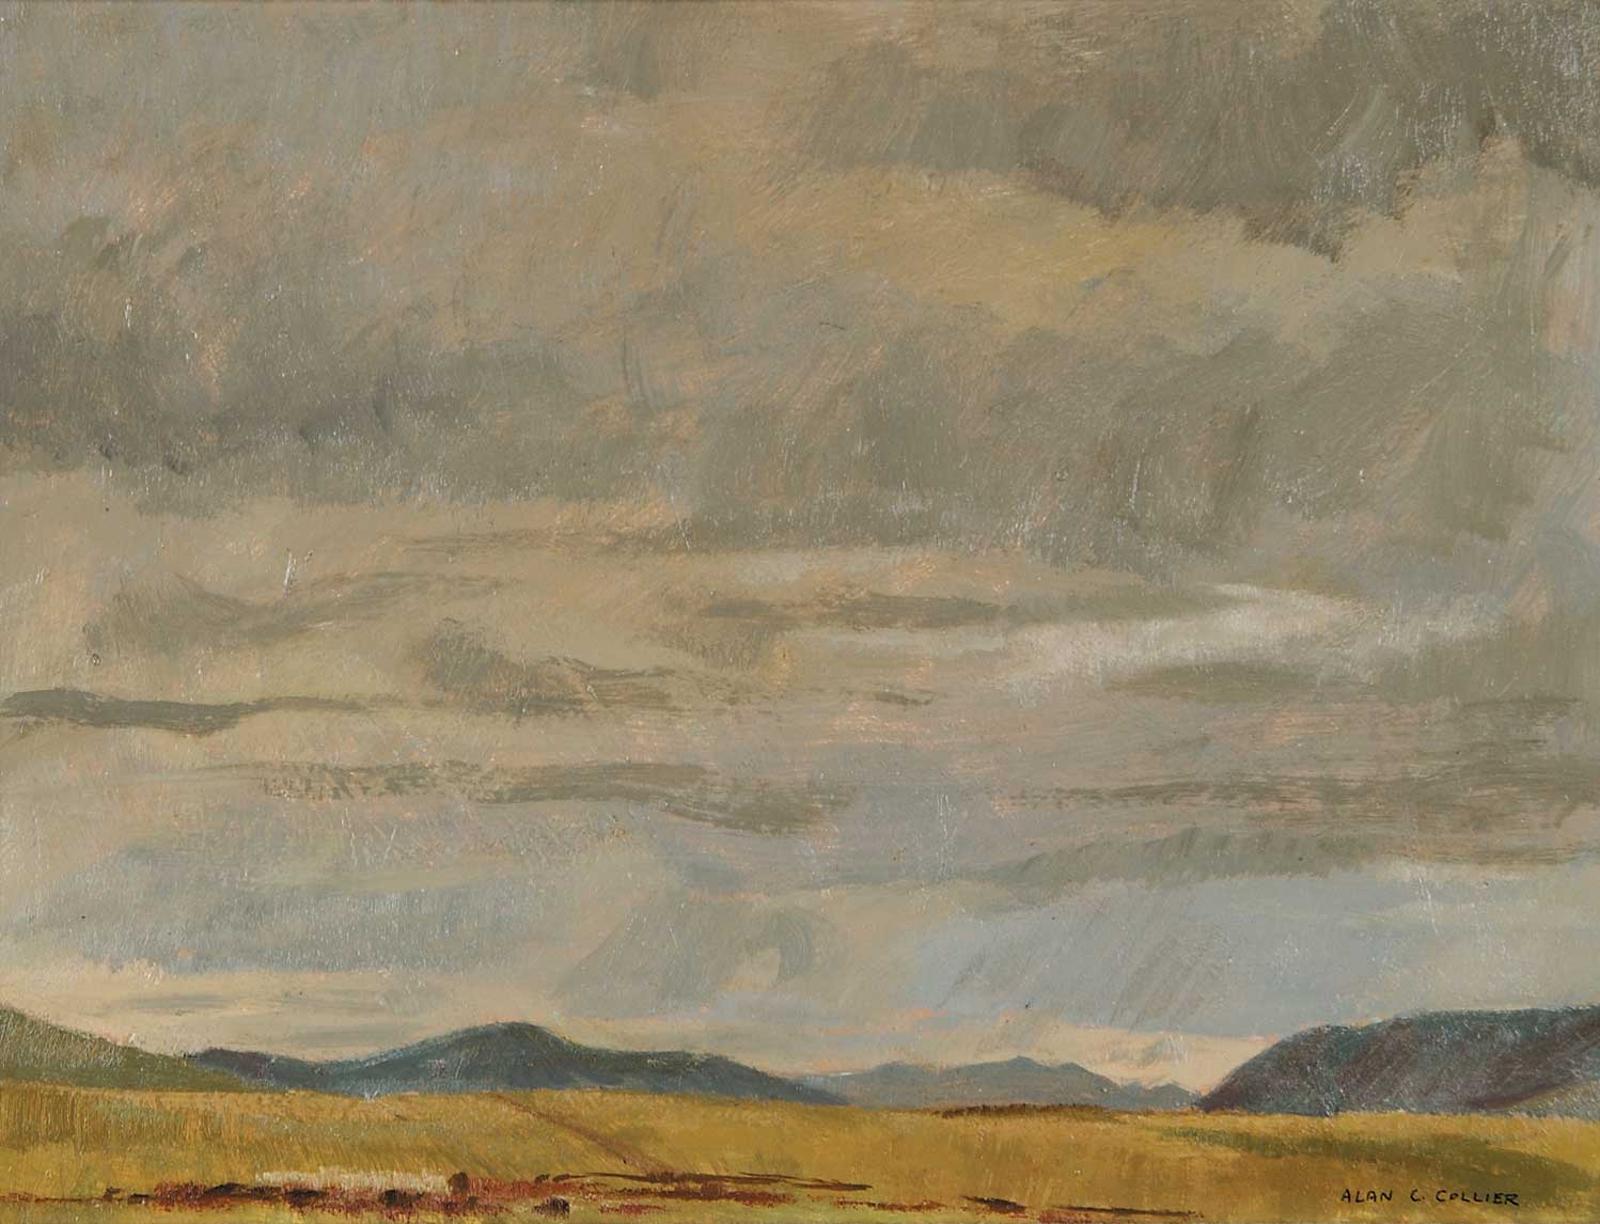 Alan Caswell Collier (1911-1990) - The Loneliness of Northern Land - Near the Arctic Circle in the Yukon